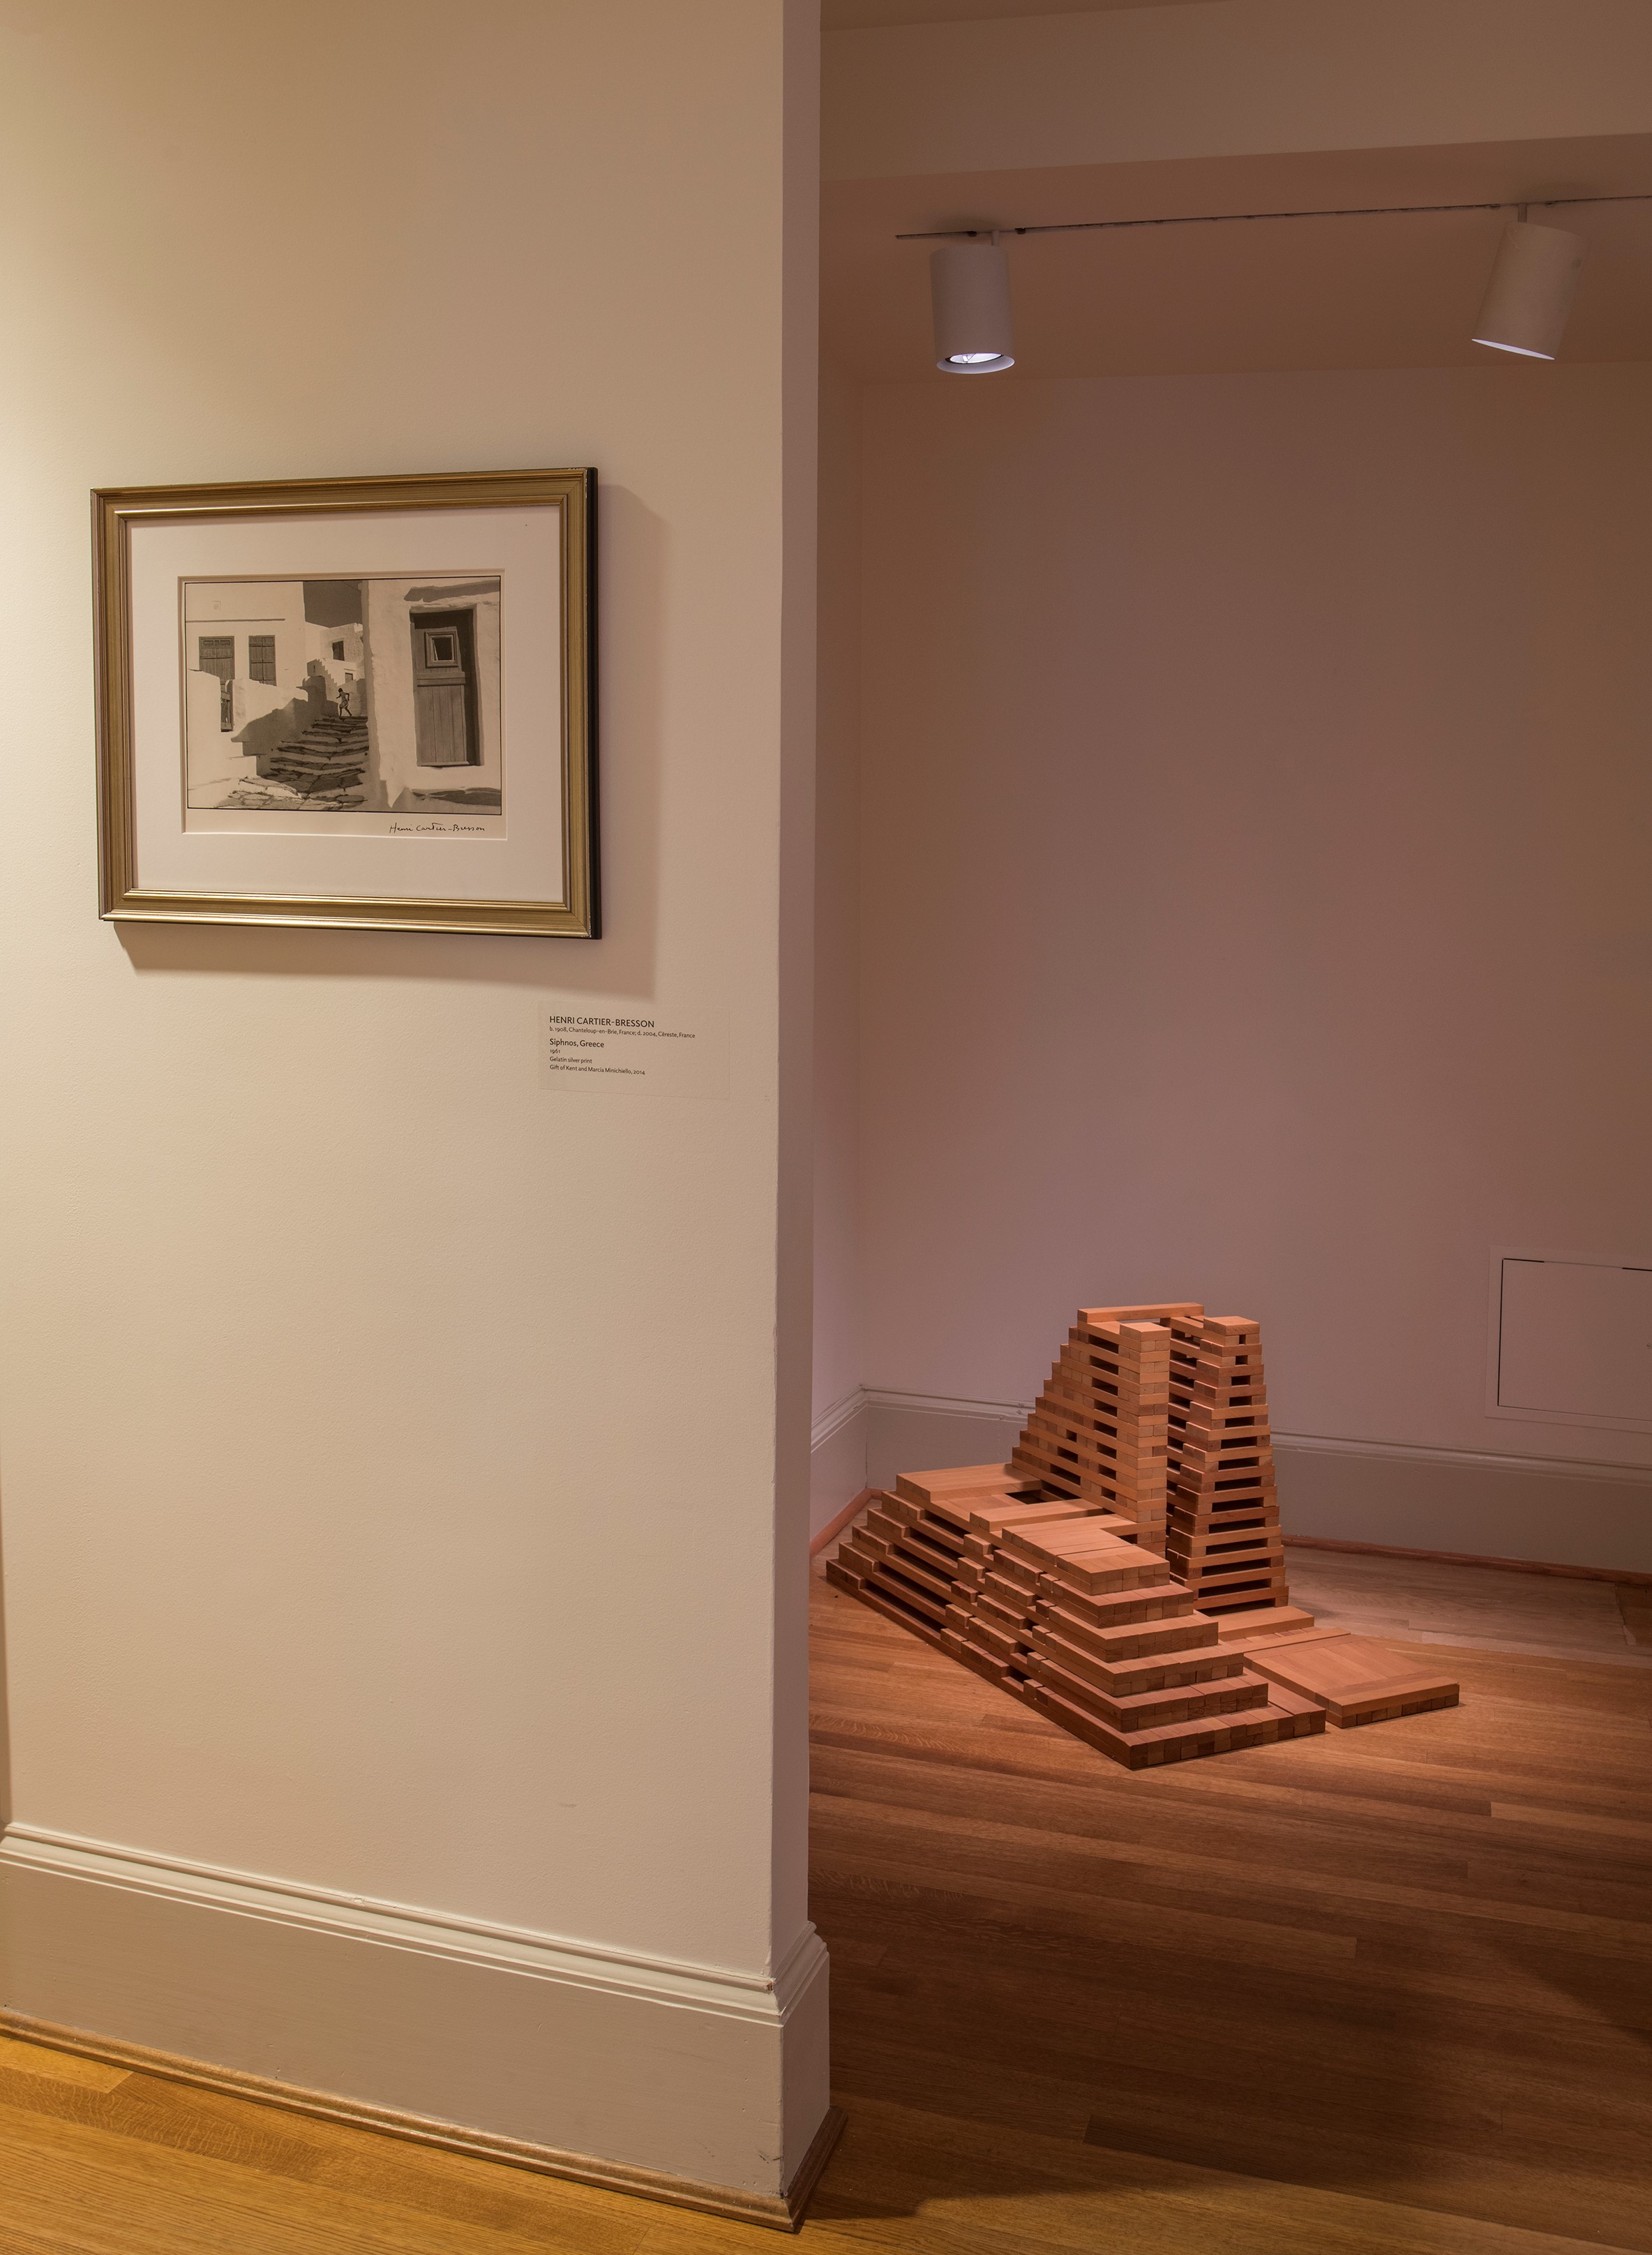 installation view of black and white photo with wood block sculpture around corner